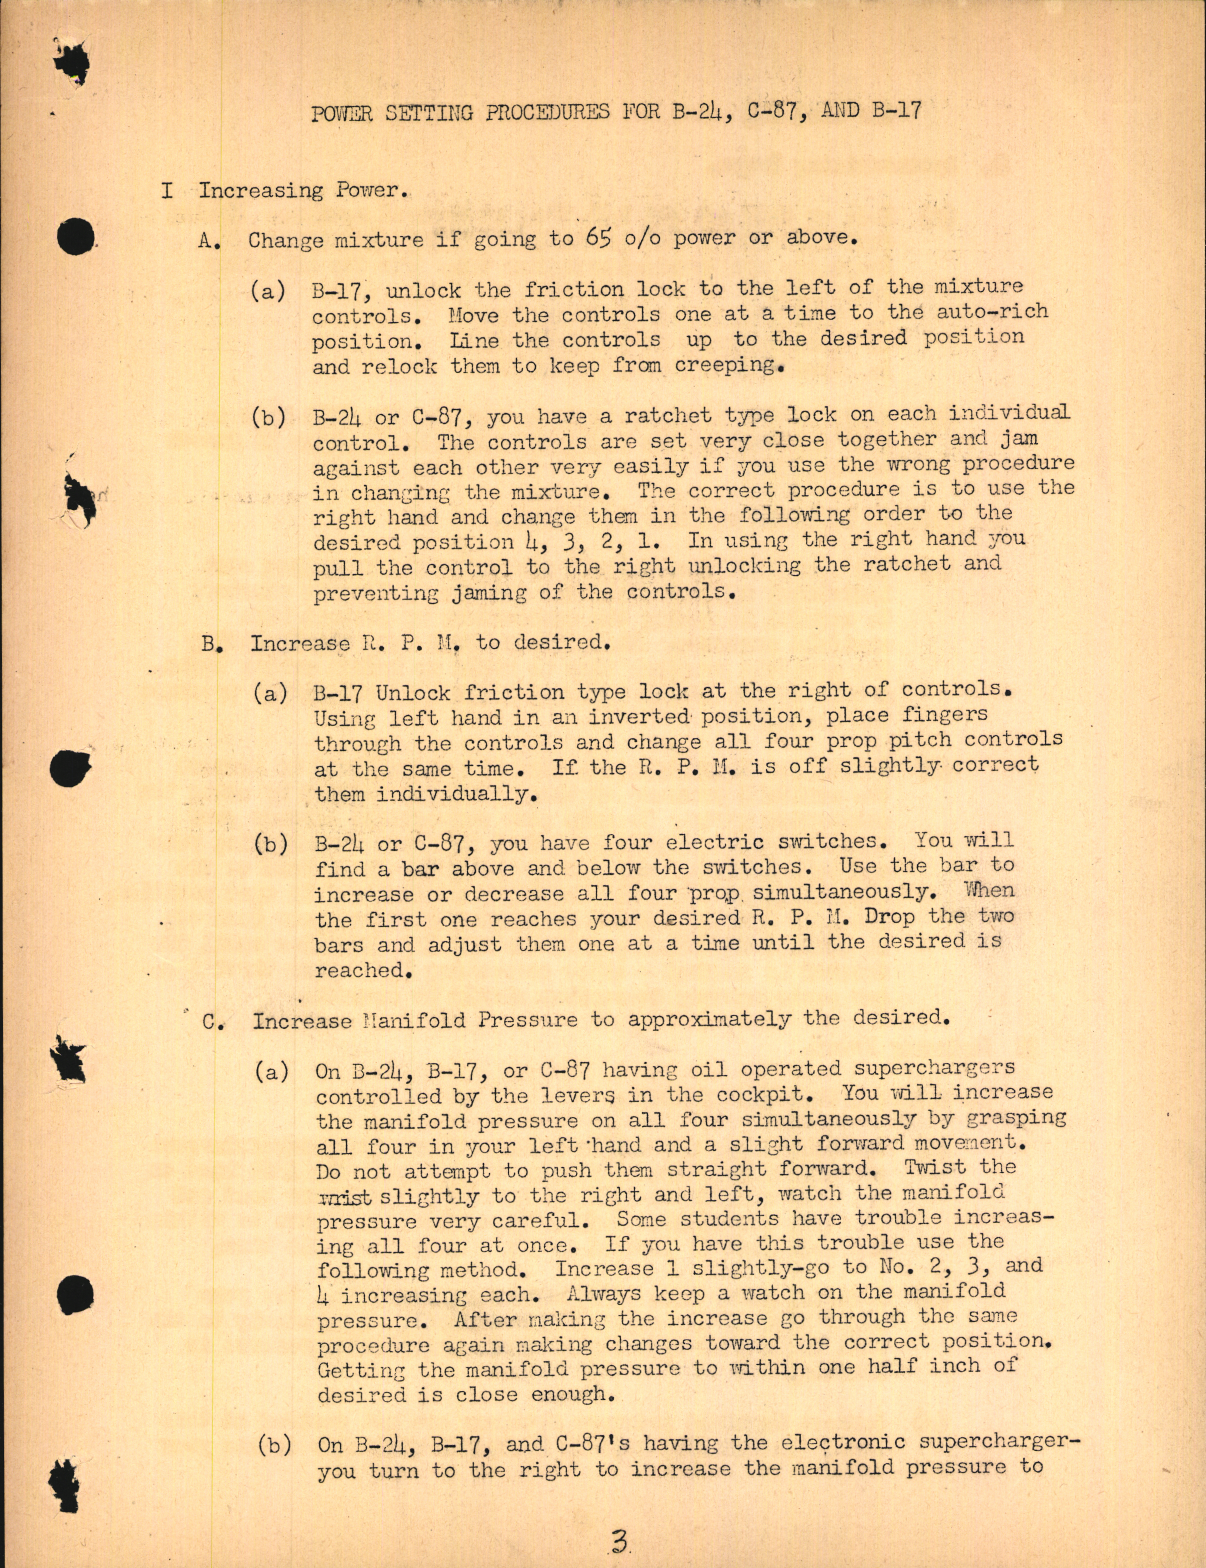 Sample page 5 from AirCorps Library document: Primary Flight Instructions for B-24, C-87, and B-17, Flight Engineer Division